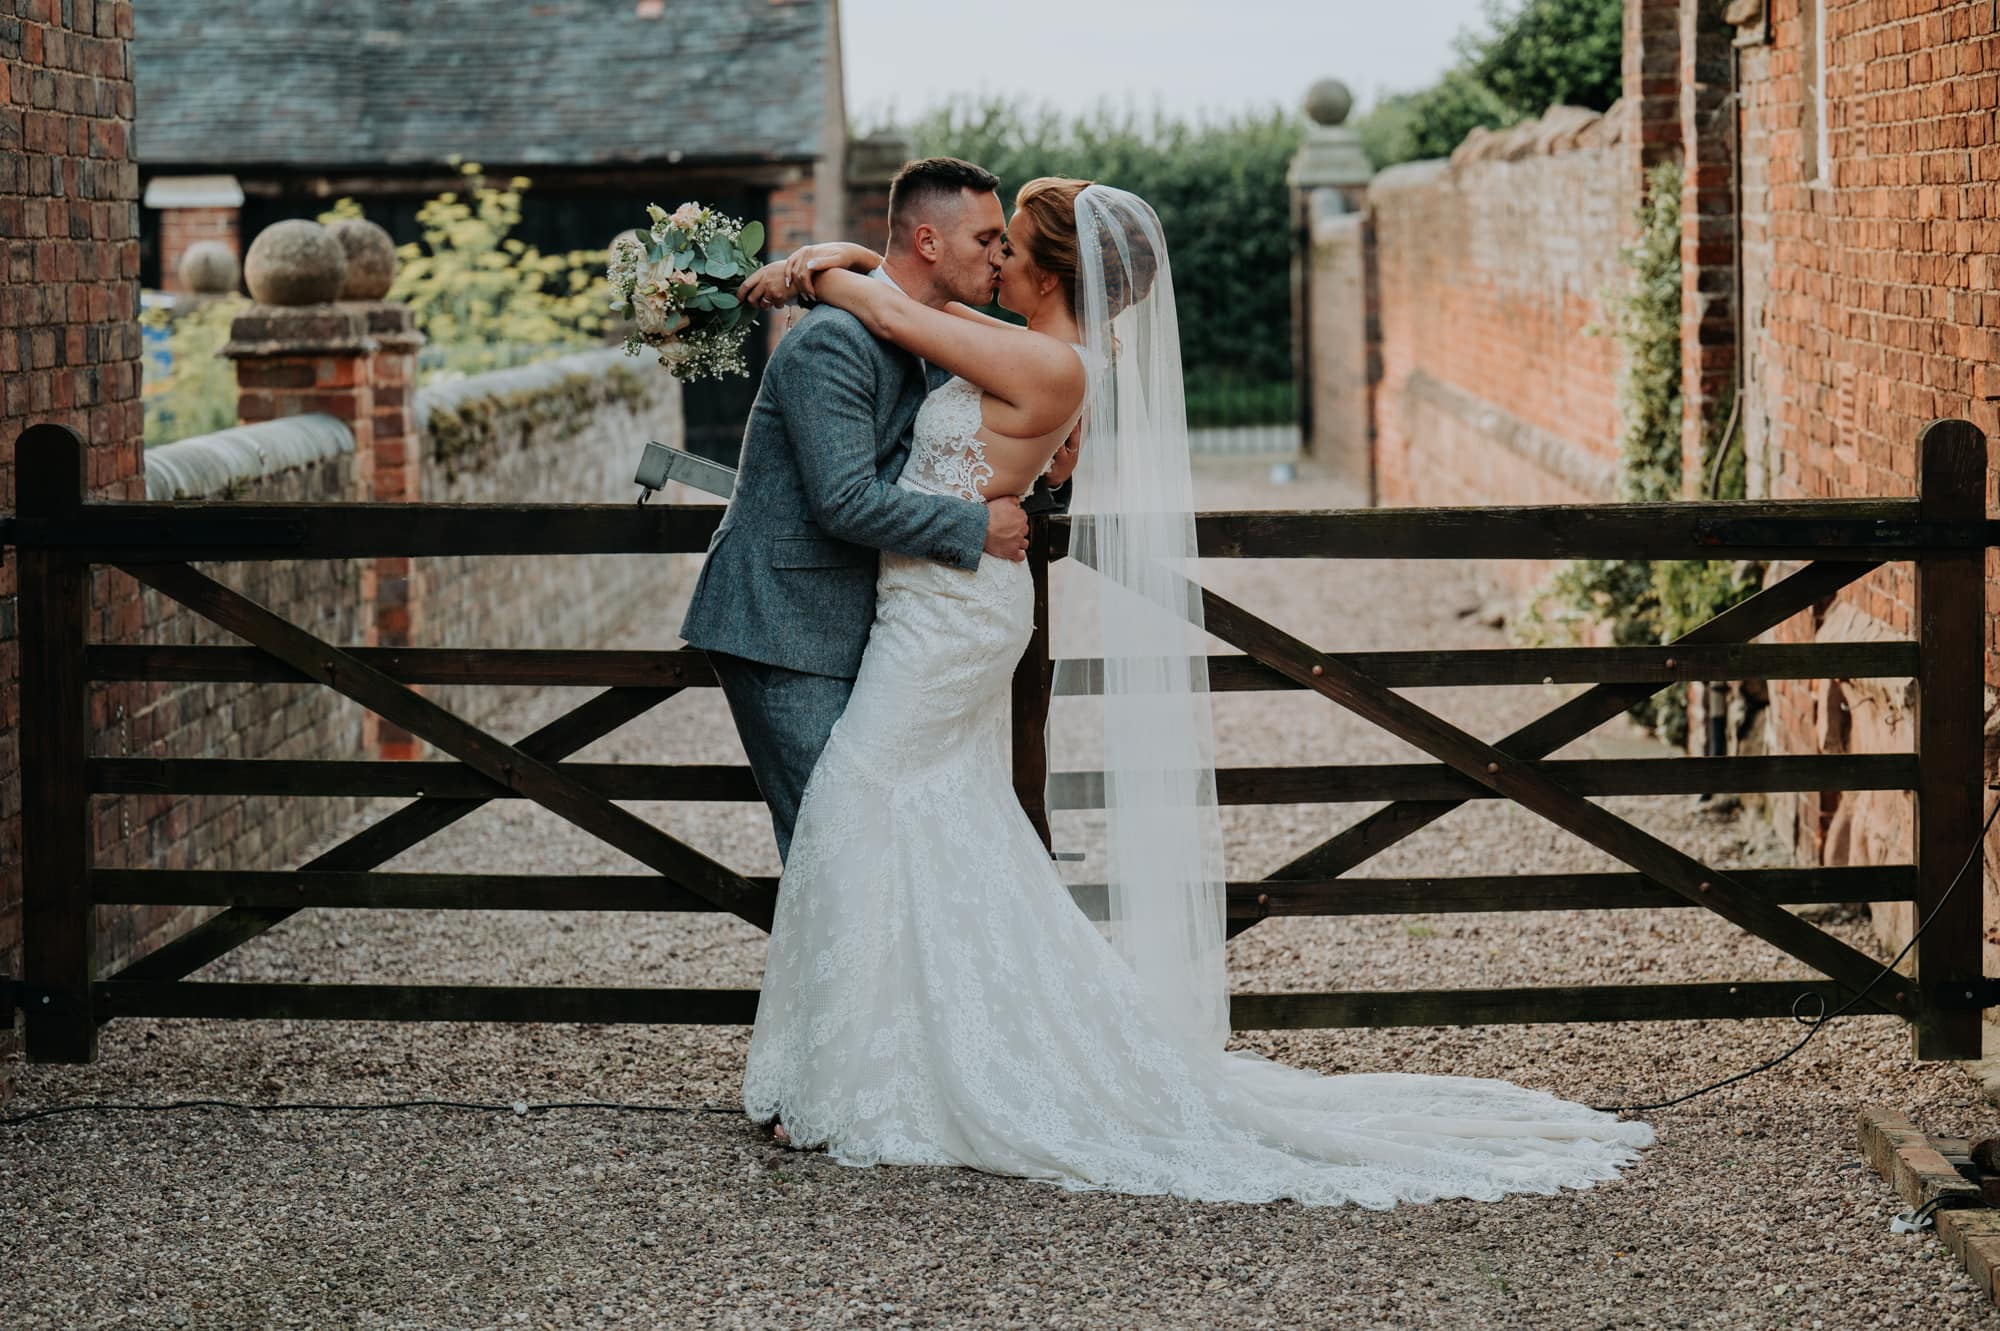 Bride and Groom at Blakelands Country House - Tianna J-Williams Photography